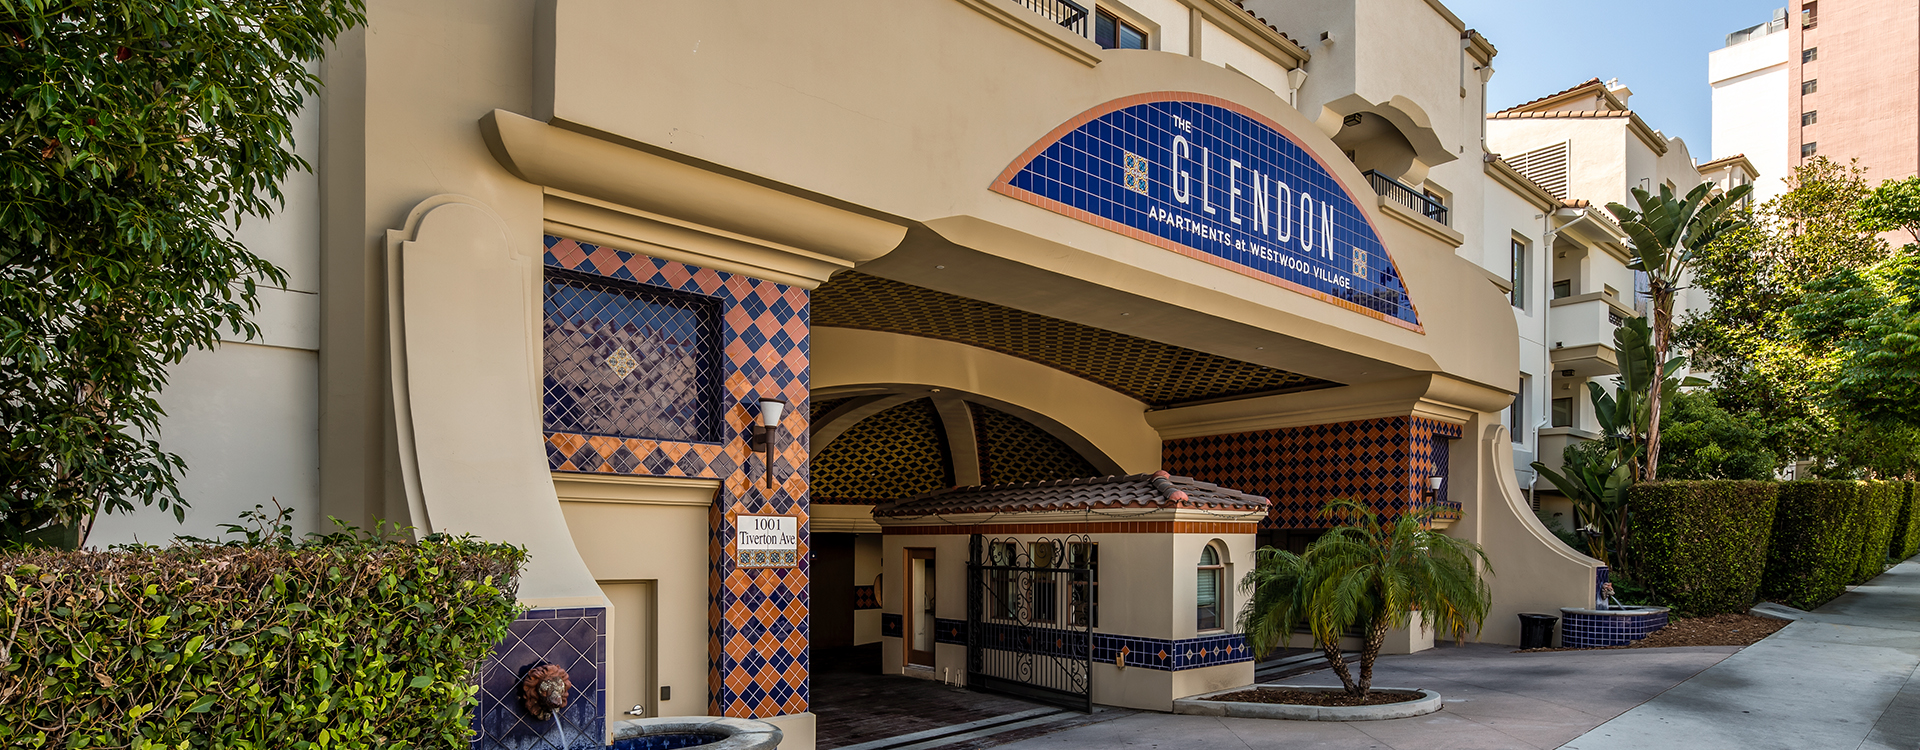 The Glendon Apartments in Westwood Village